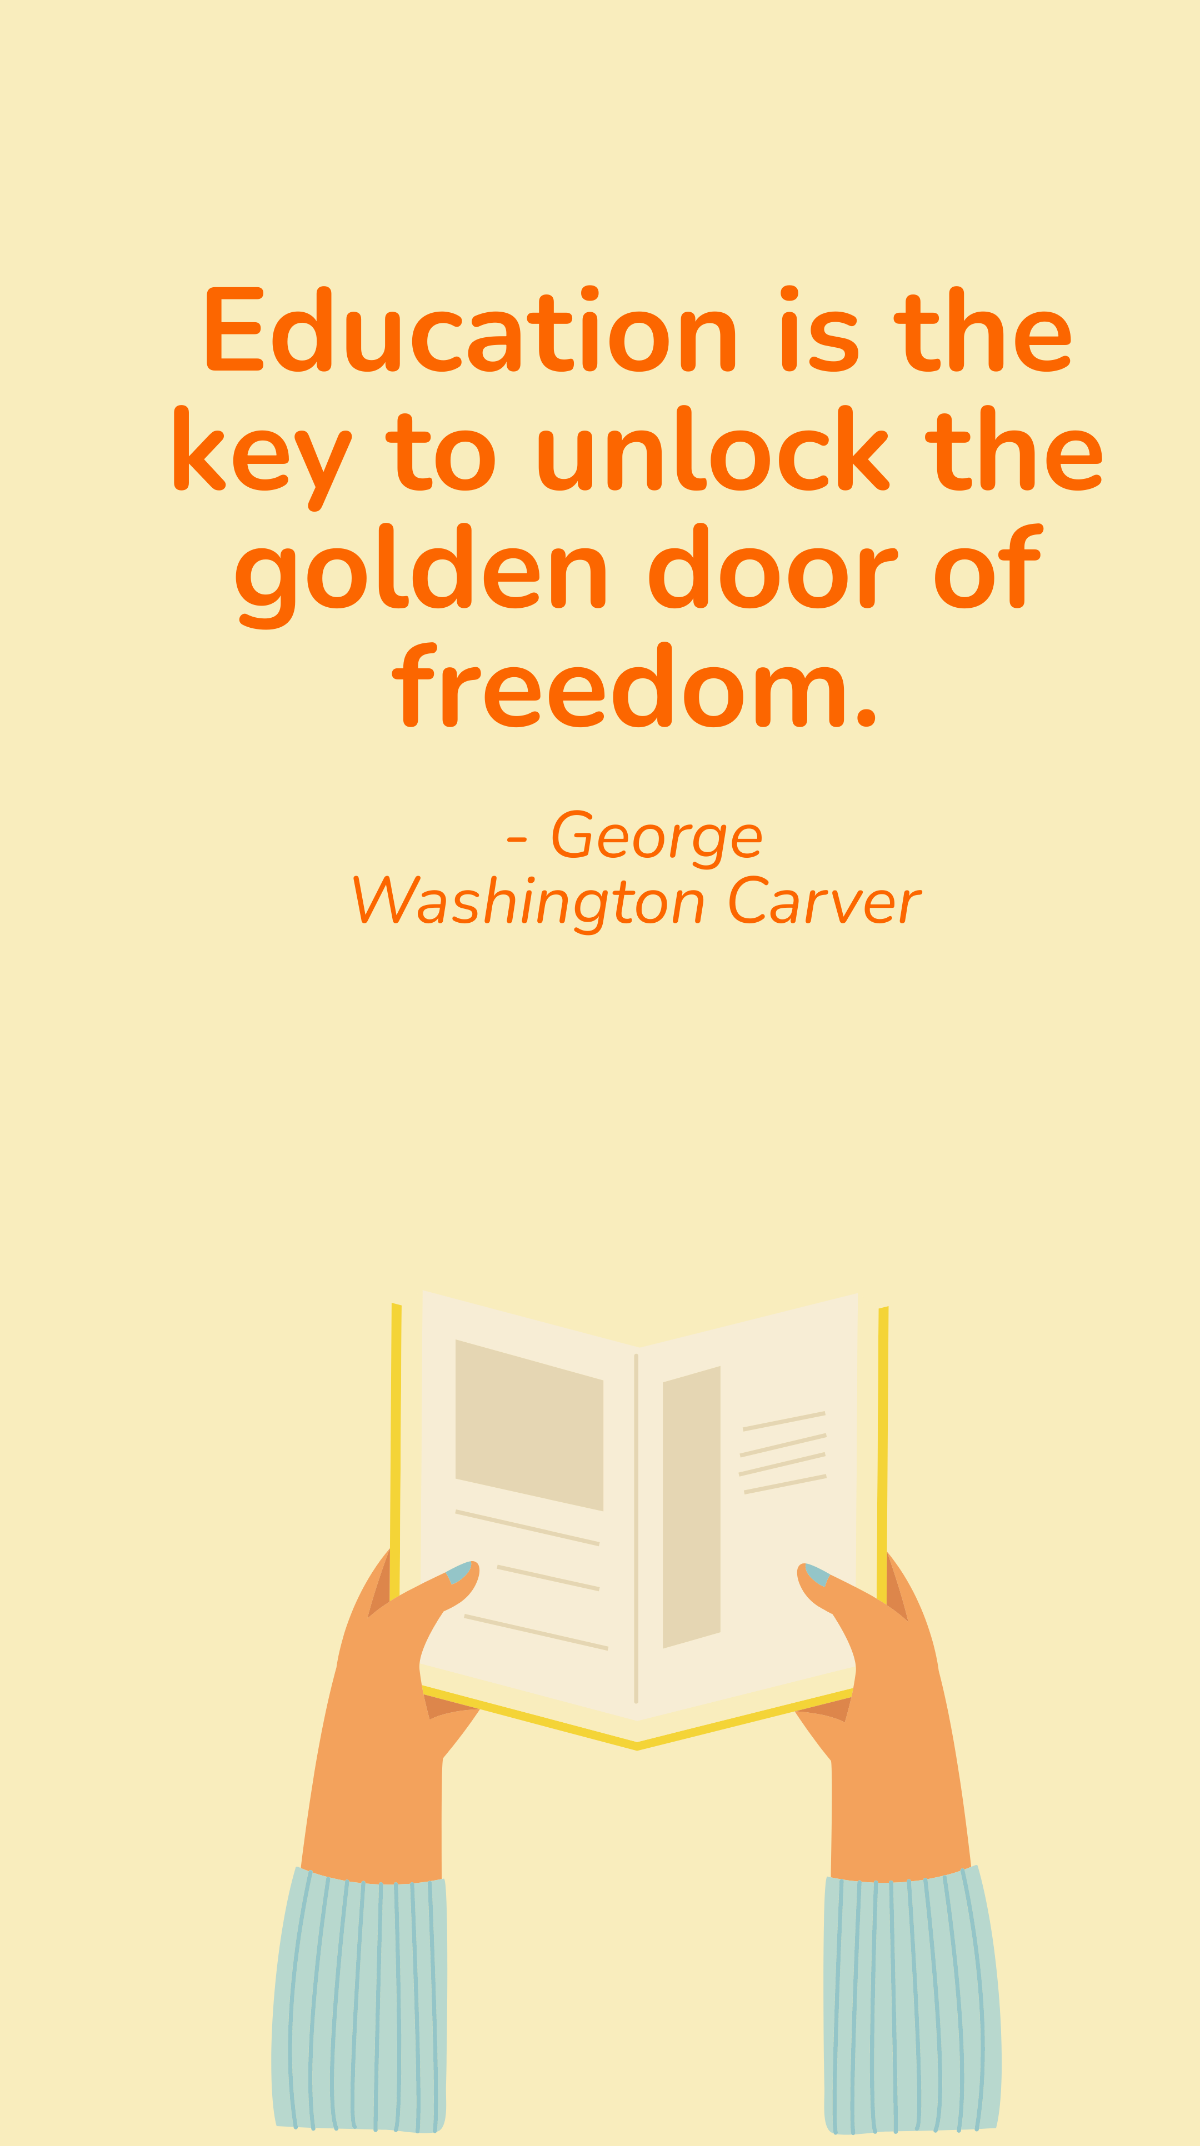 George Washington Carver - Education is the key to unlock the golden door of freedom.